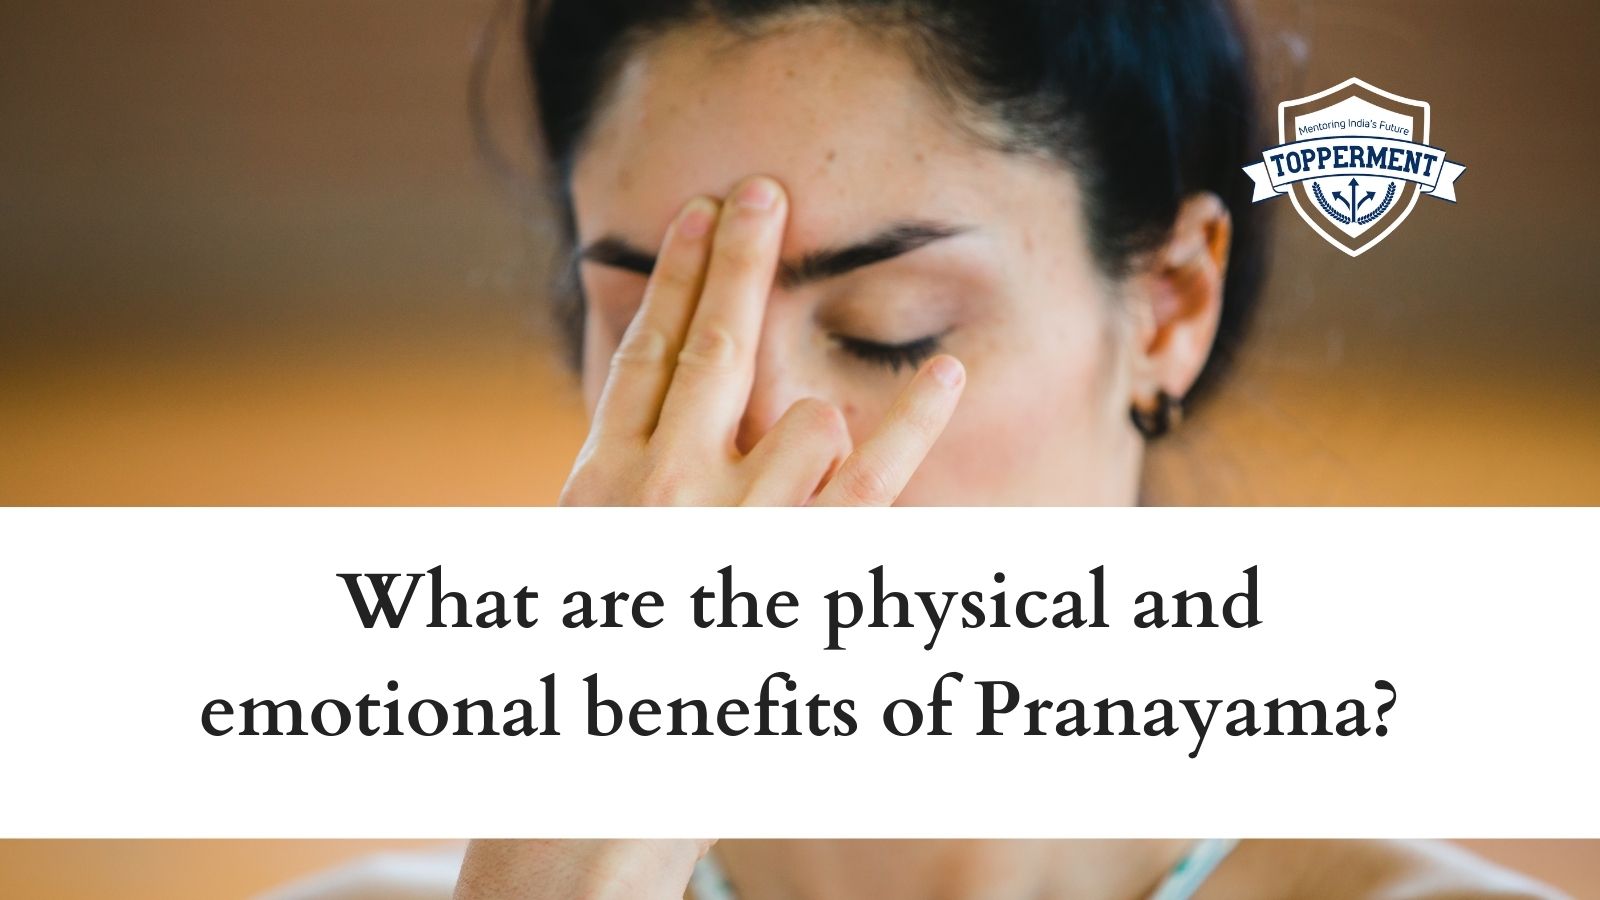 What-are-the-physical-and-emotional-benefits-of-Pranayama-Best-UPSC-IAS-Coaching-For-Mentorship-And-Guidance